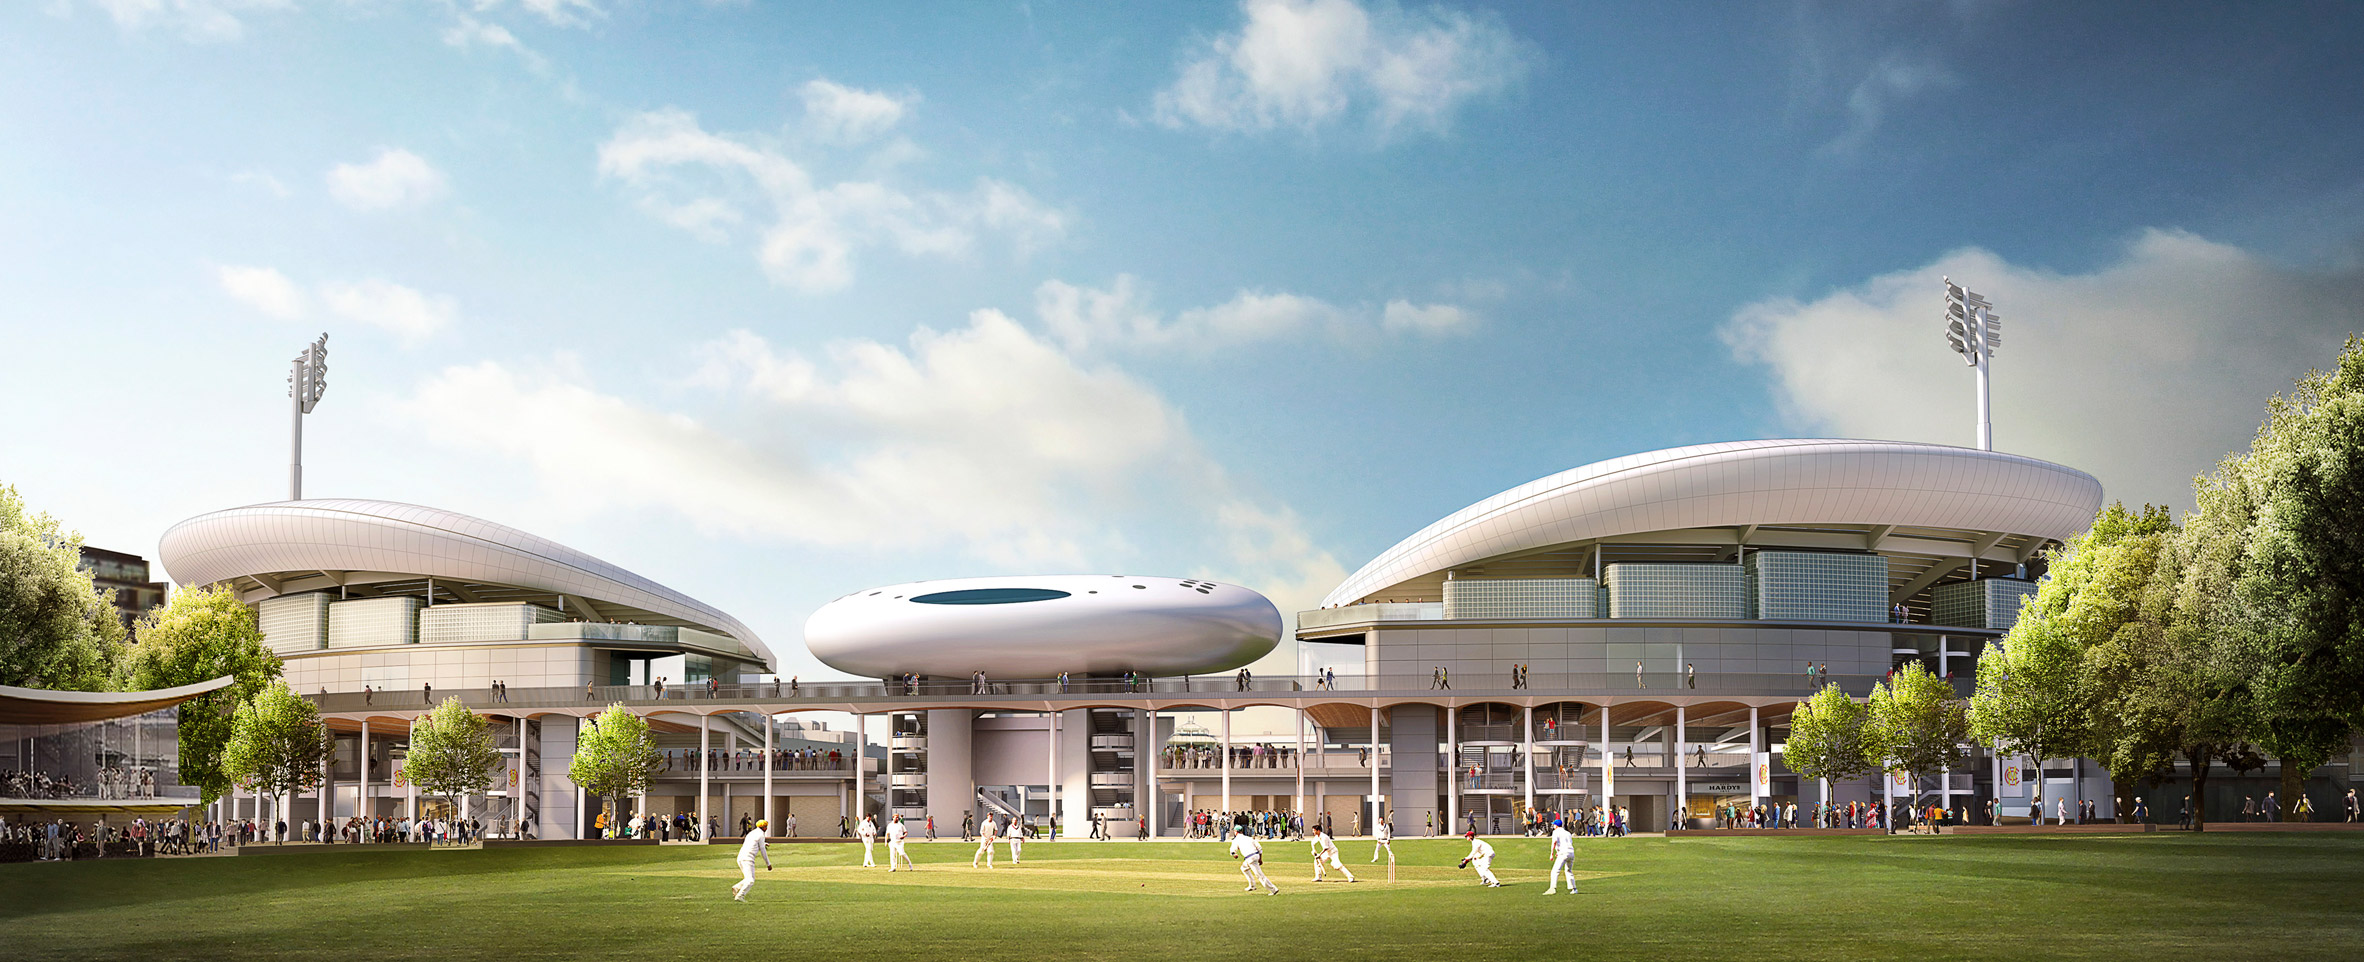 Wilkinson Eyre's Compton and Edrich Stands at Lord's Cricket Ground